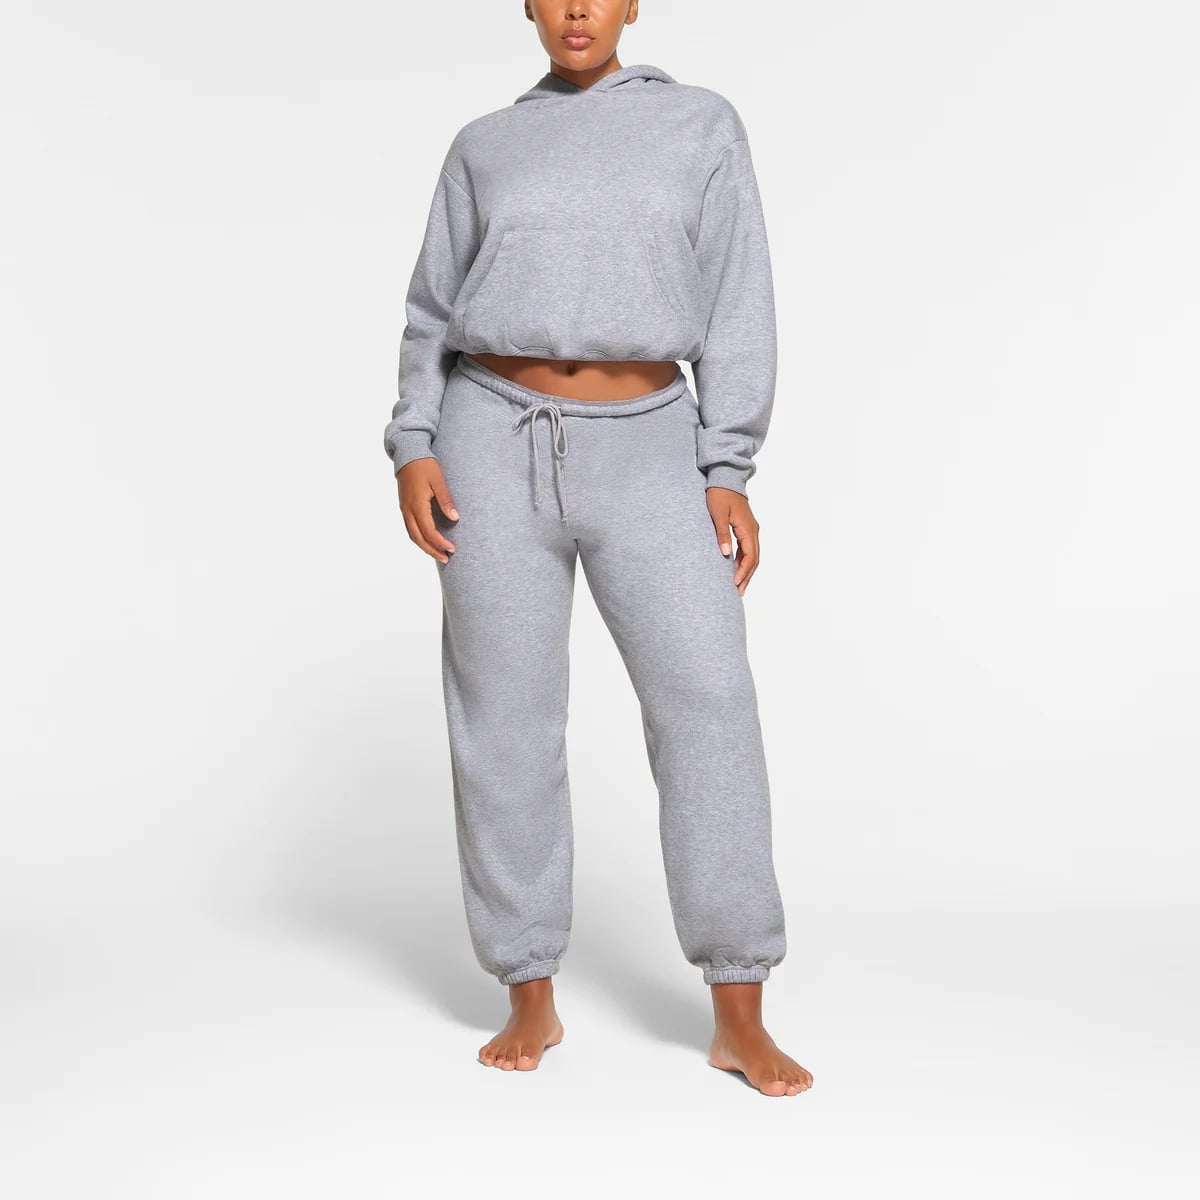 9 Gray Sweatpants Outfits That Are Comfortable but Elevated